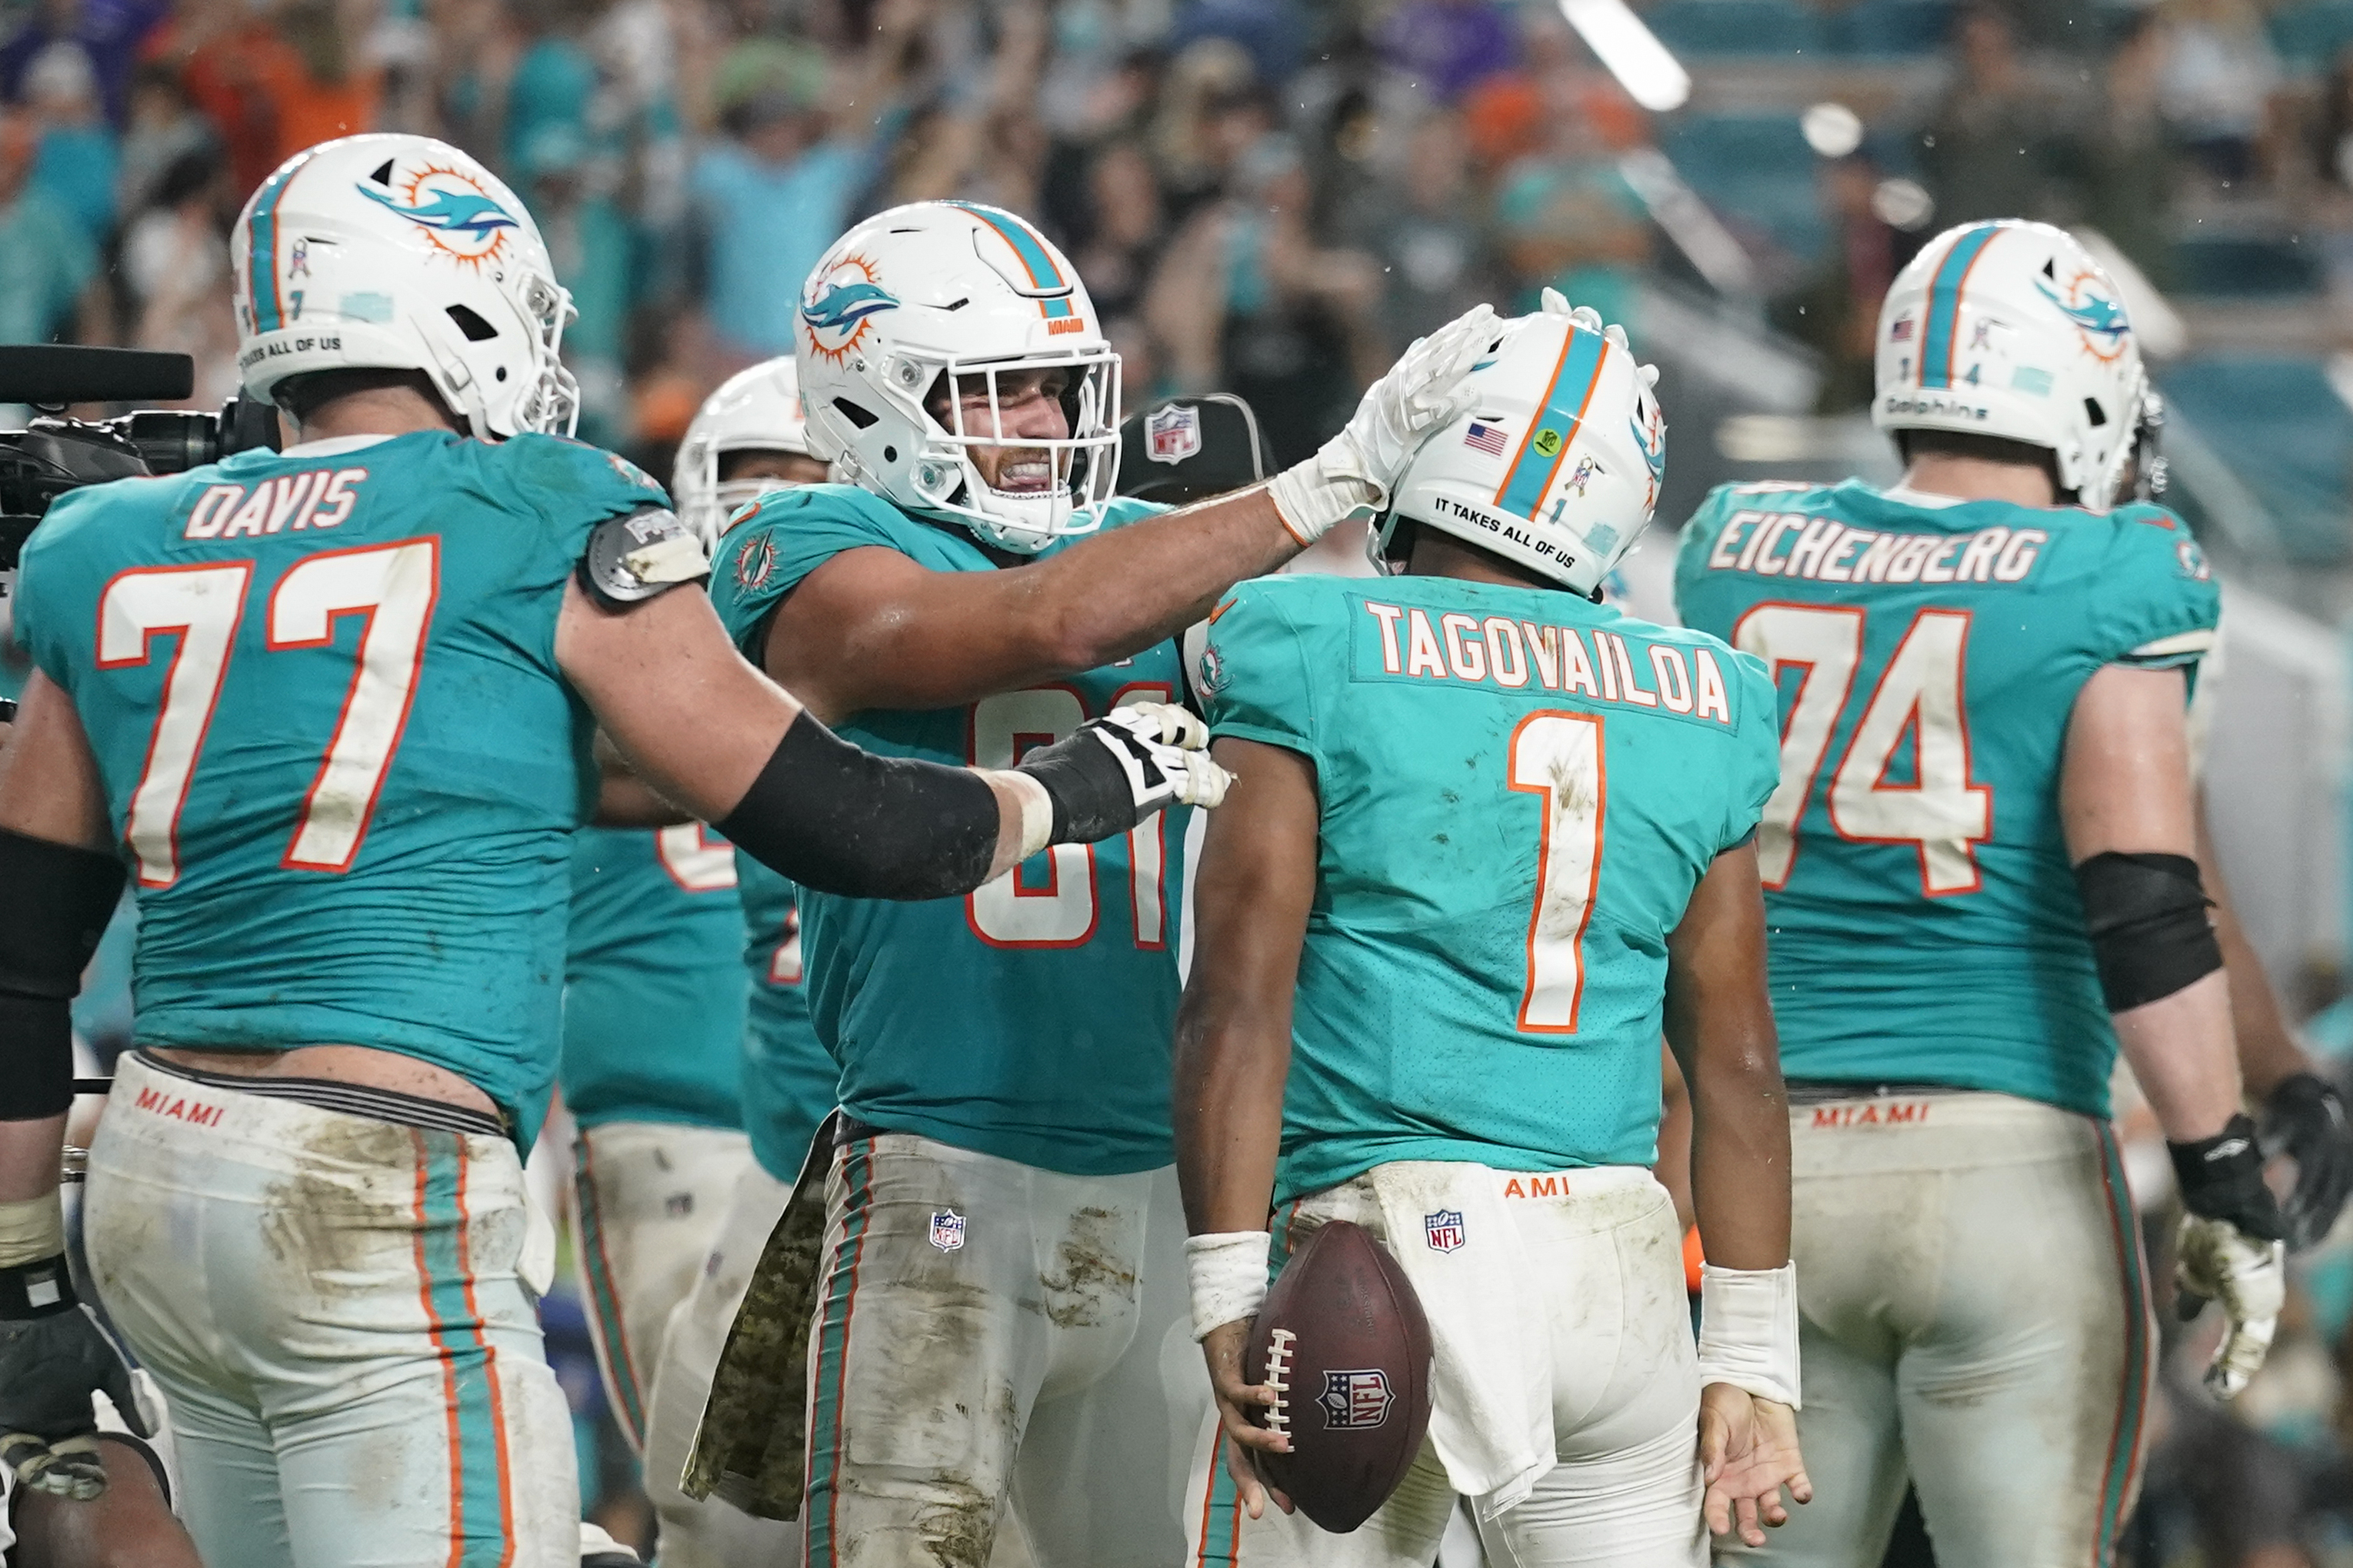 A stunner: Miami wins 2nd straight, tops Ravens 22-10